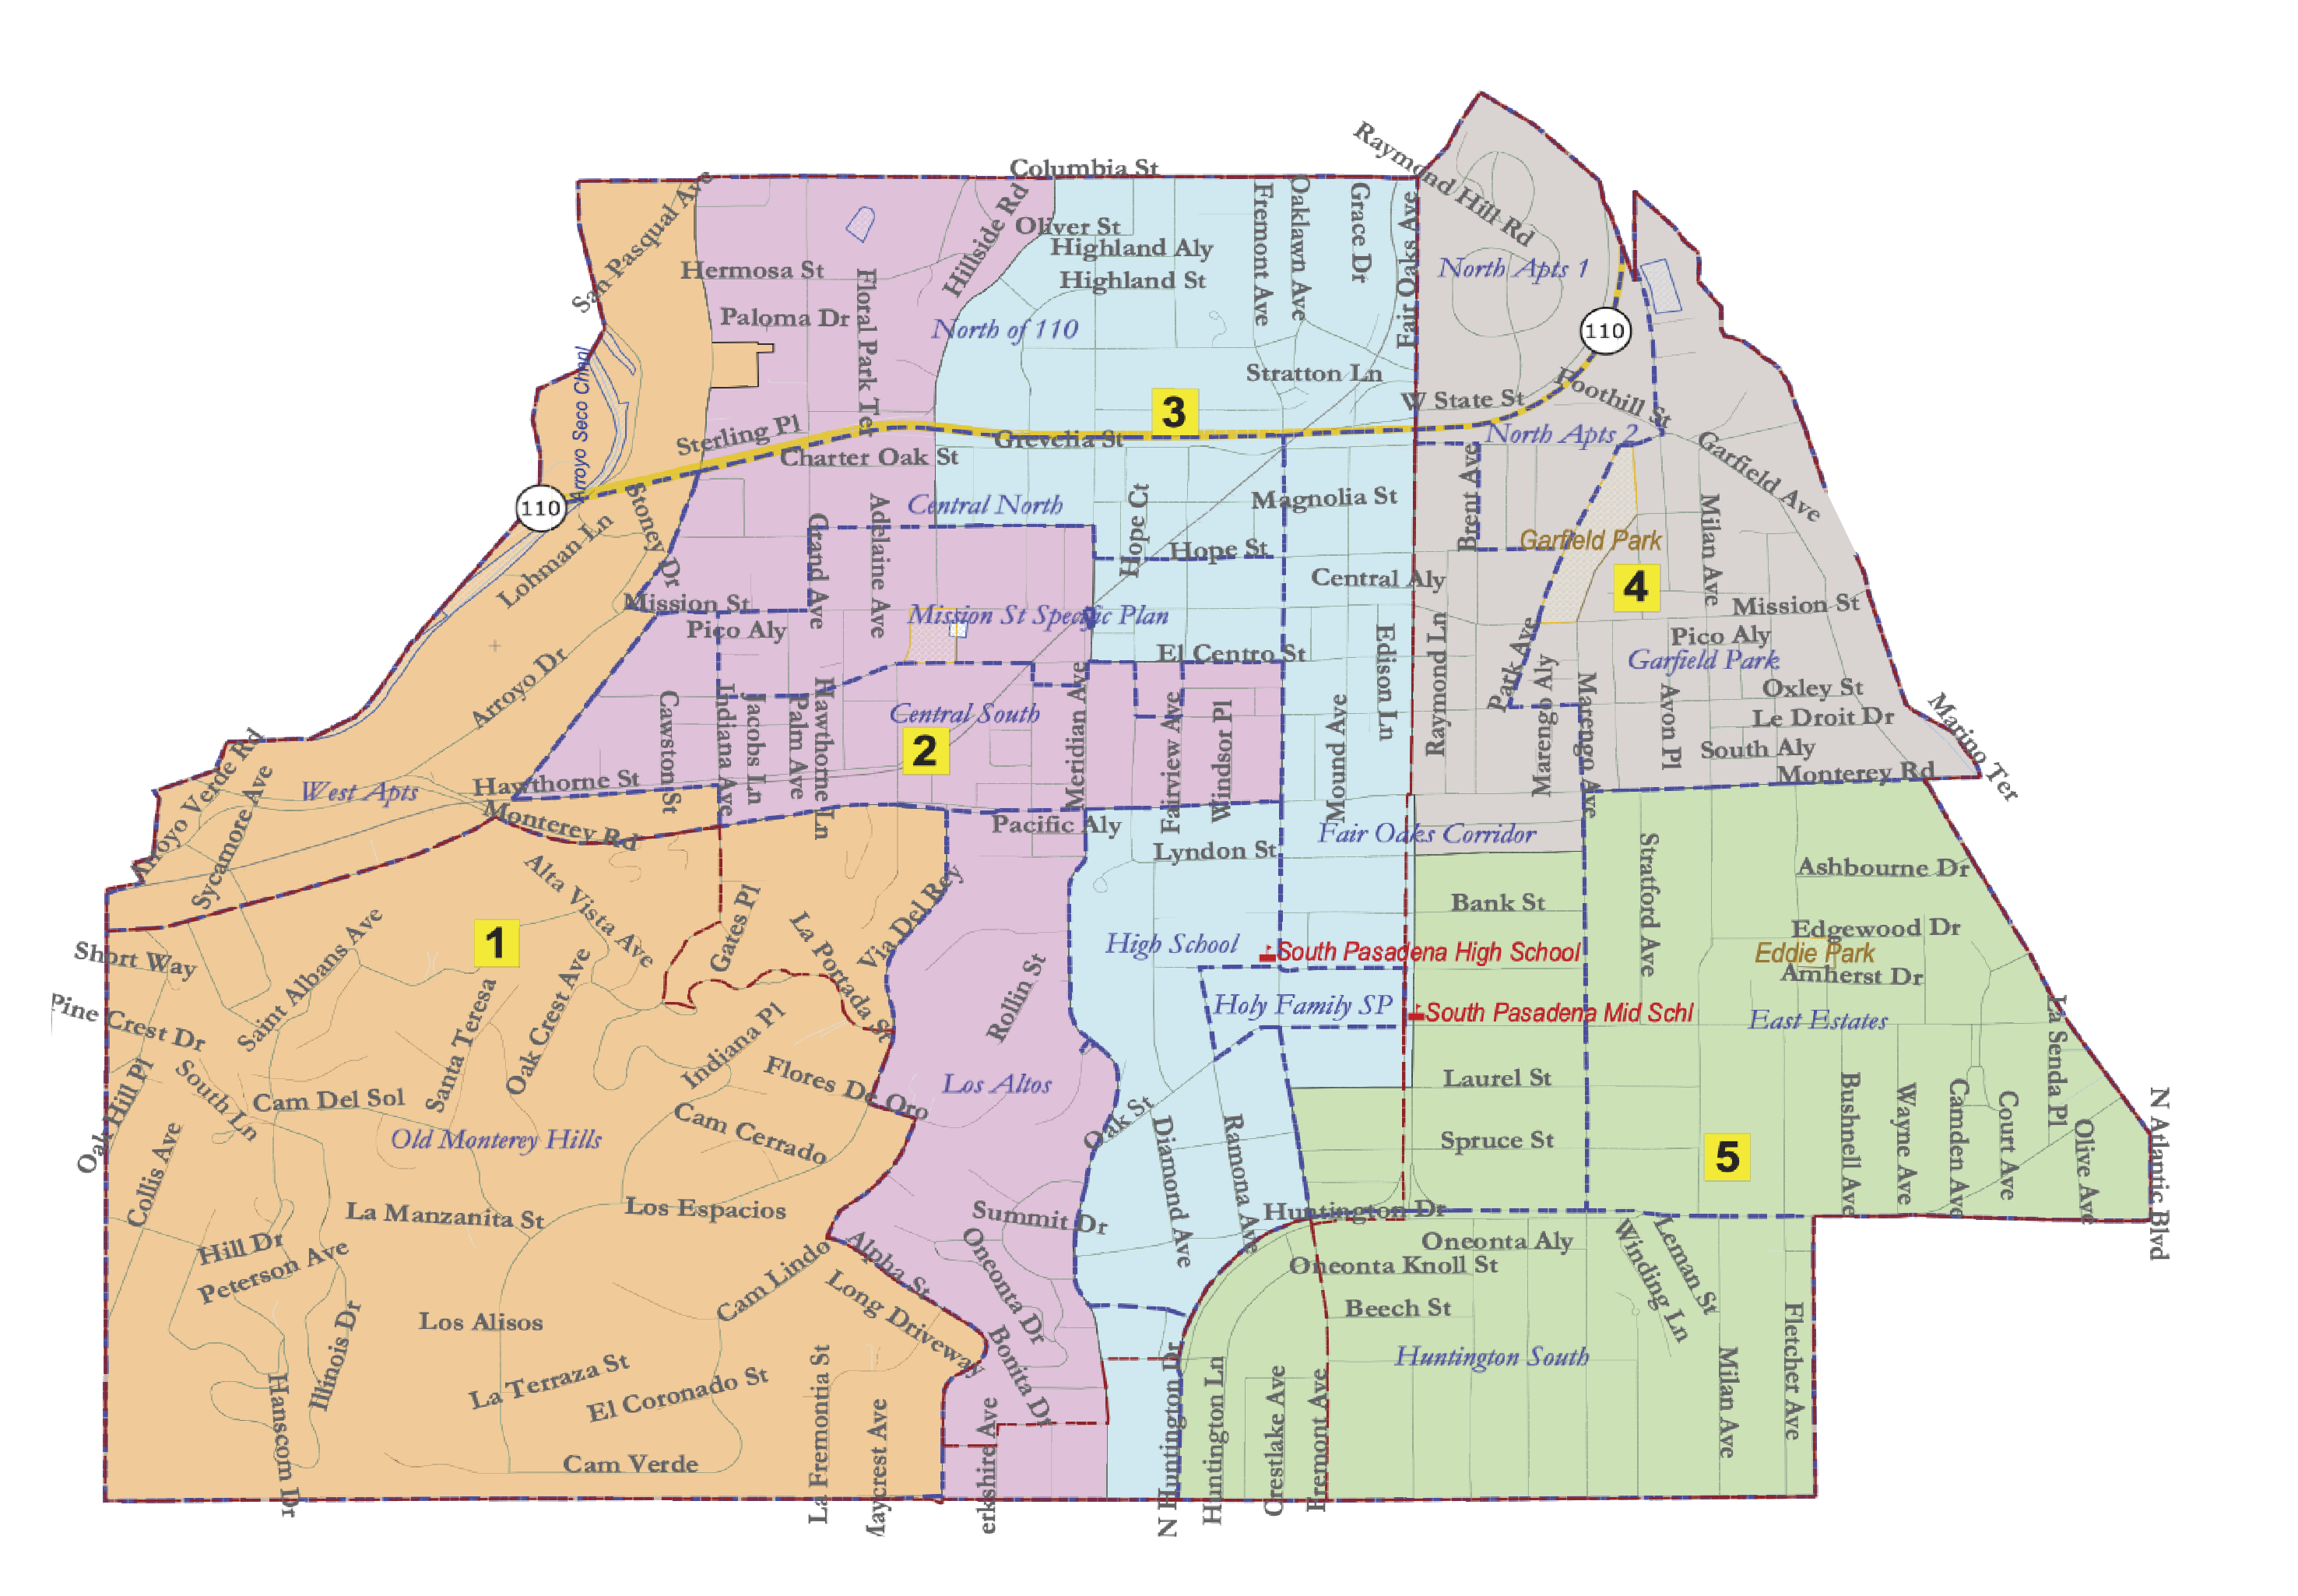 Thumbnail for City Council districts spark cries of local gerrymandering